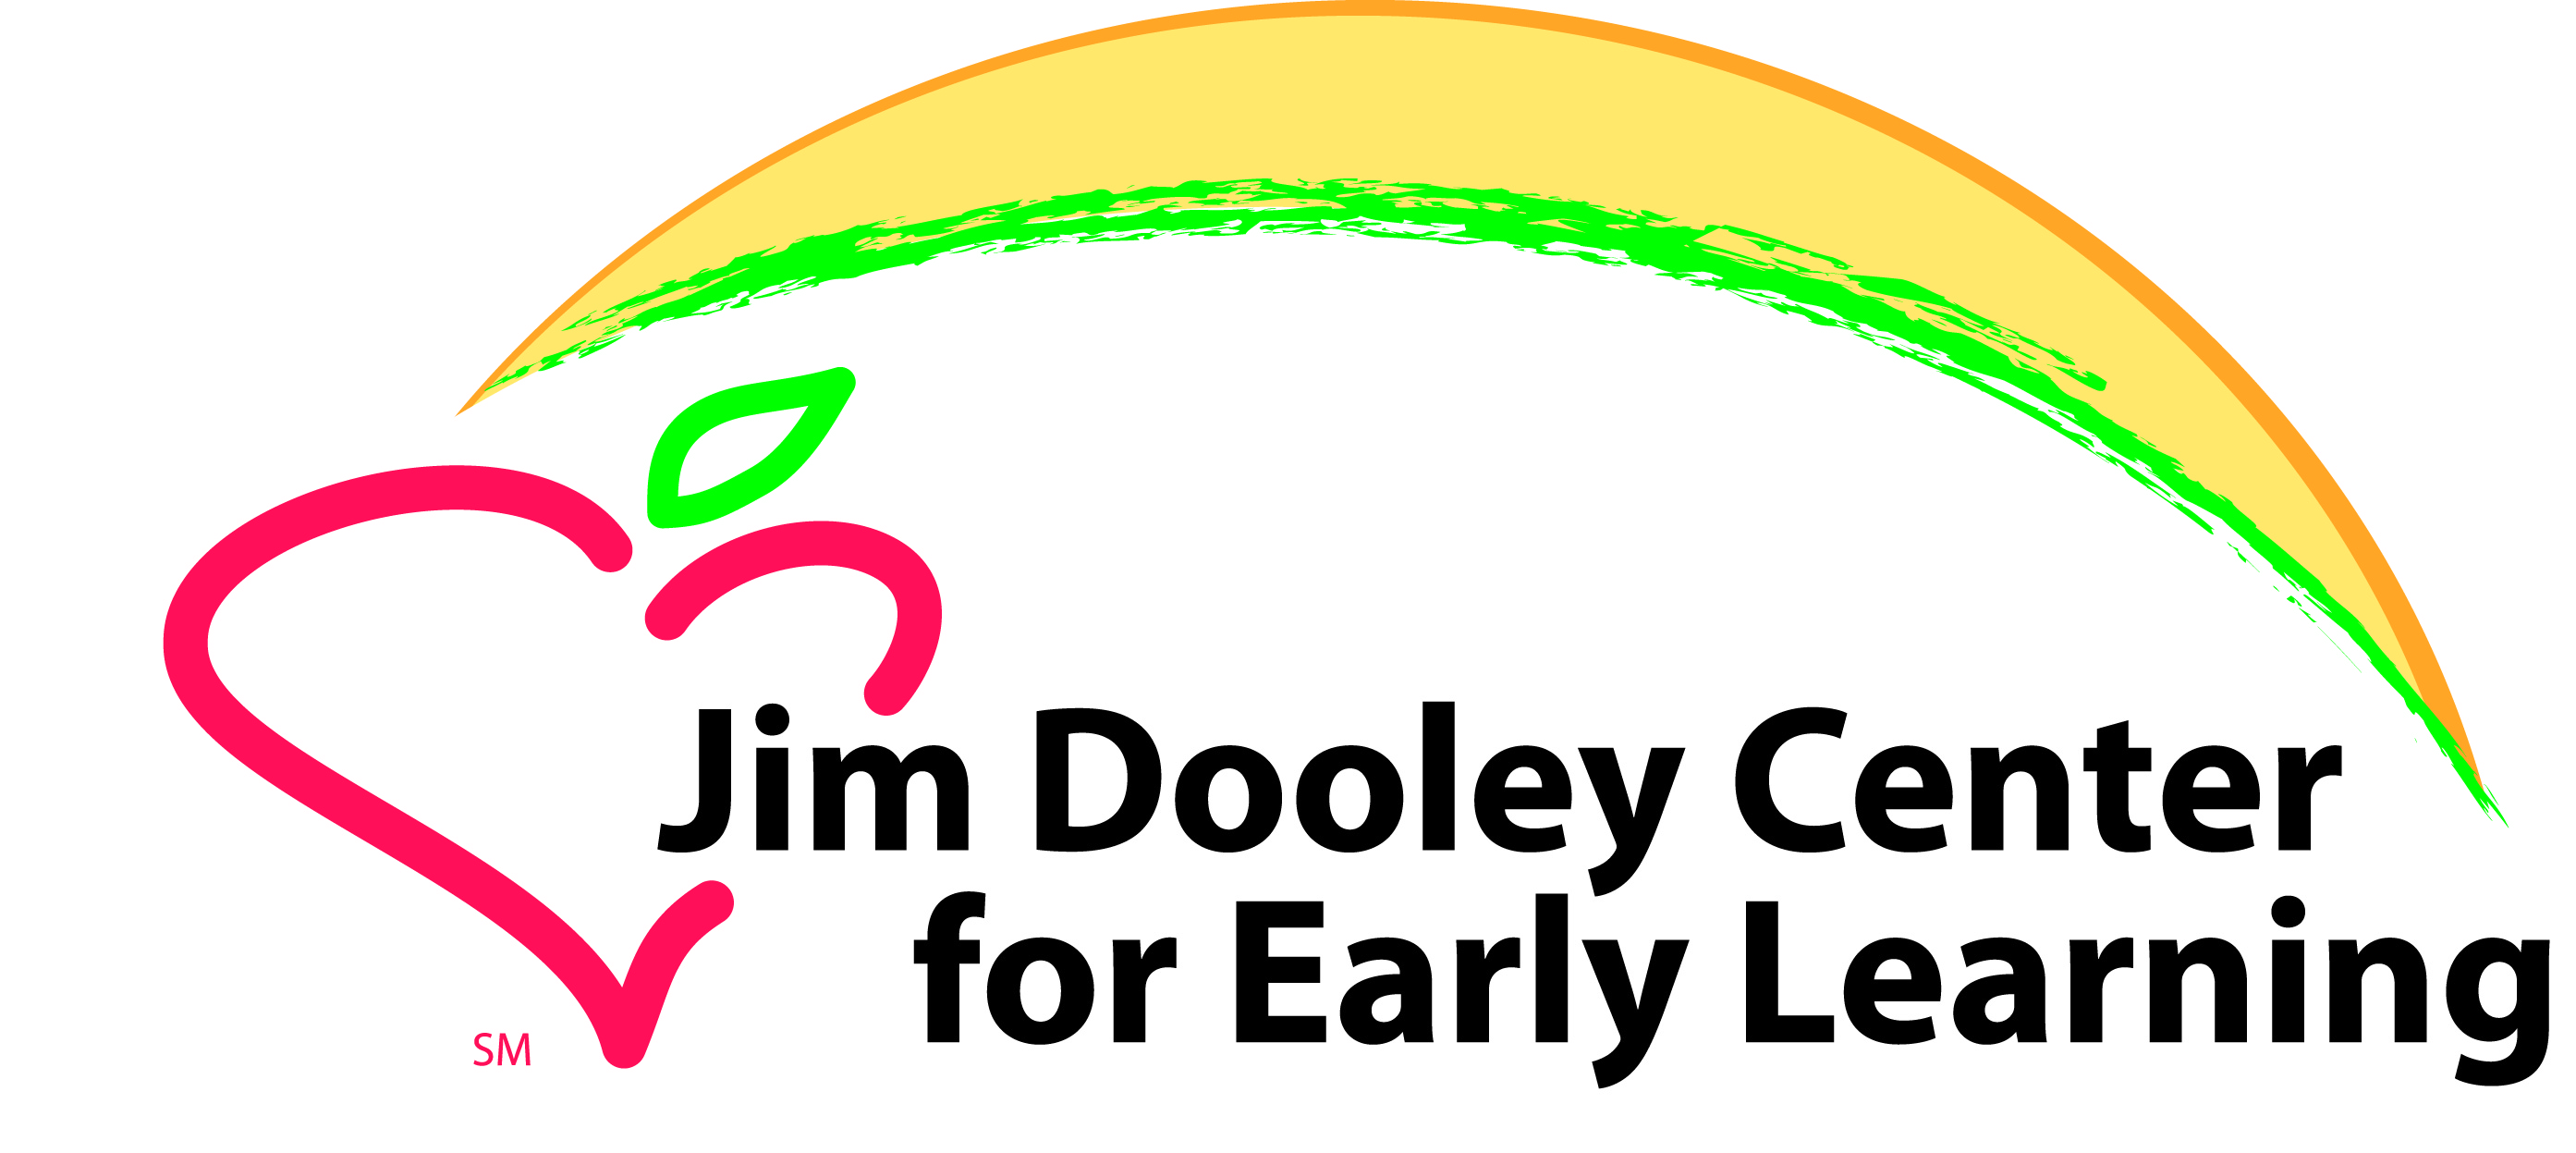 Jim Dooley Center for Early Learning at Geneva General Hospital